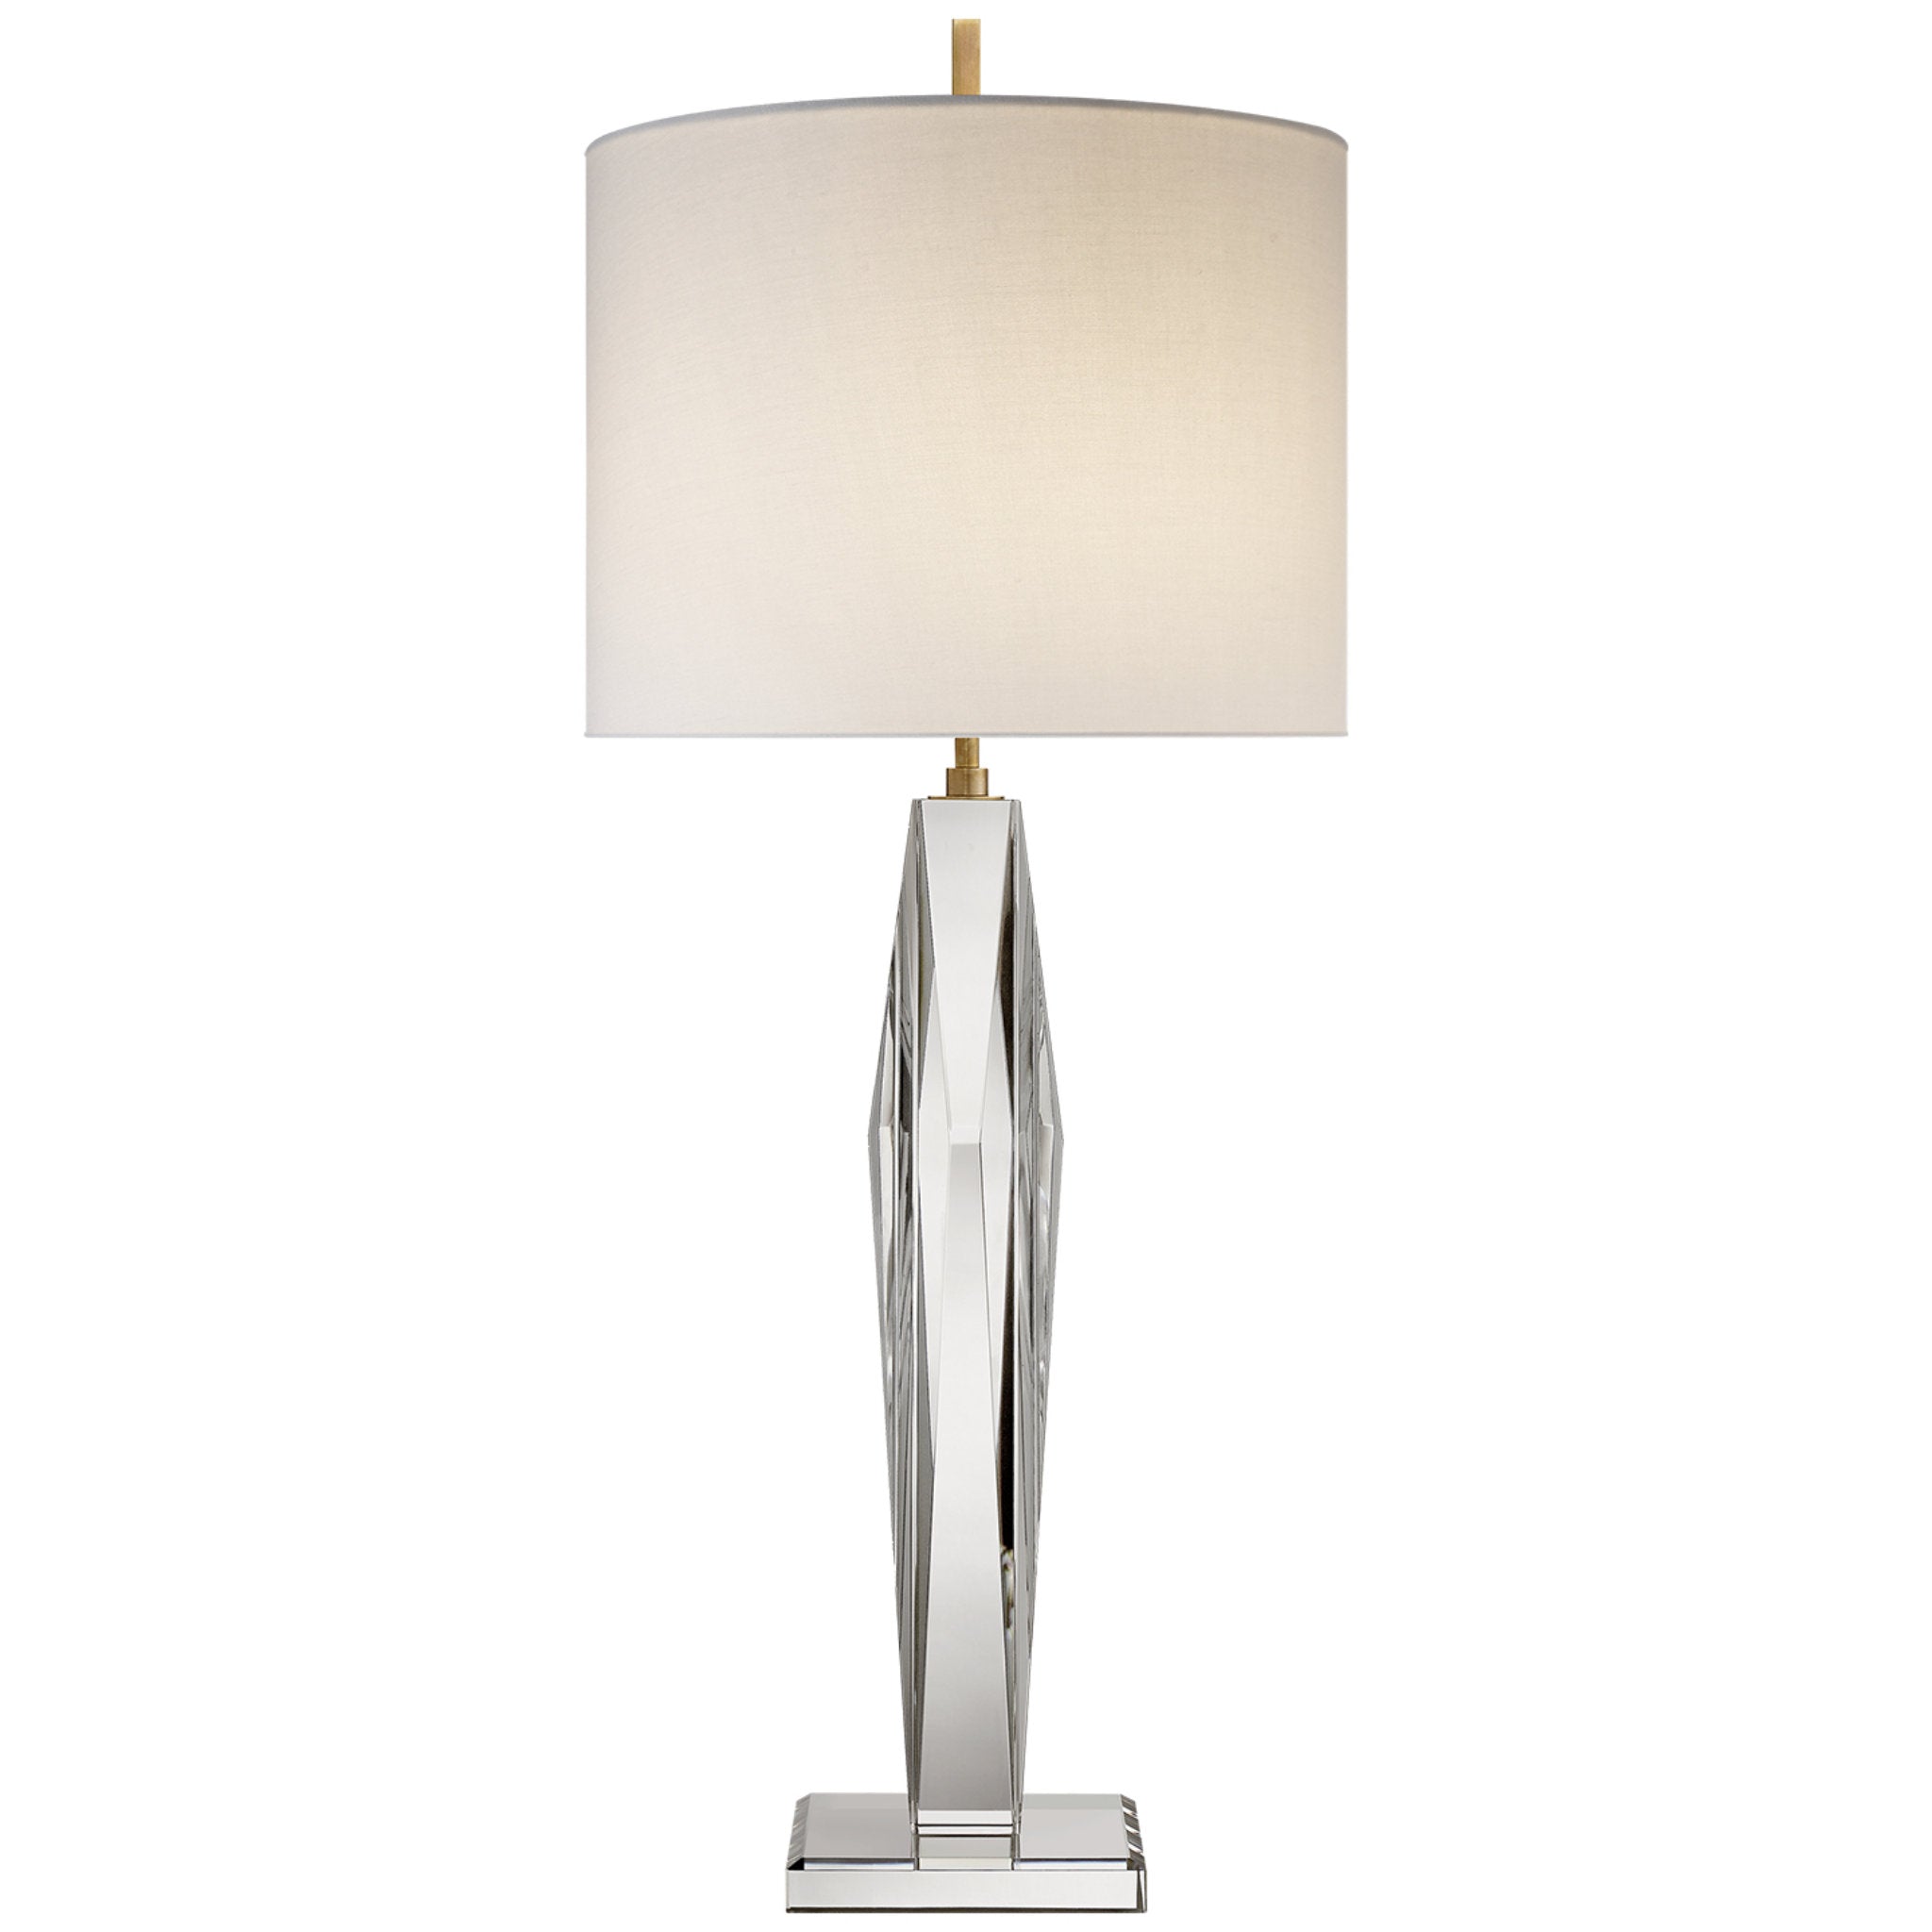 kate spade new york Castle Peak Narrow Table Lamp in Crystal with Cream Linen Shade